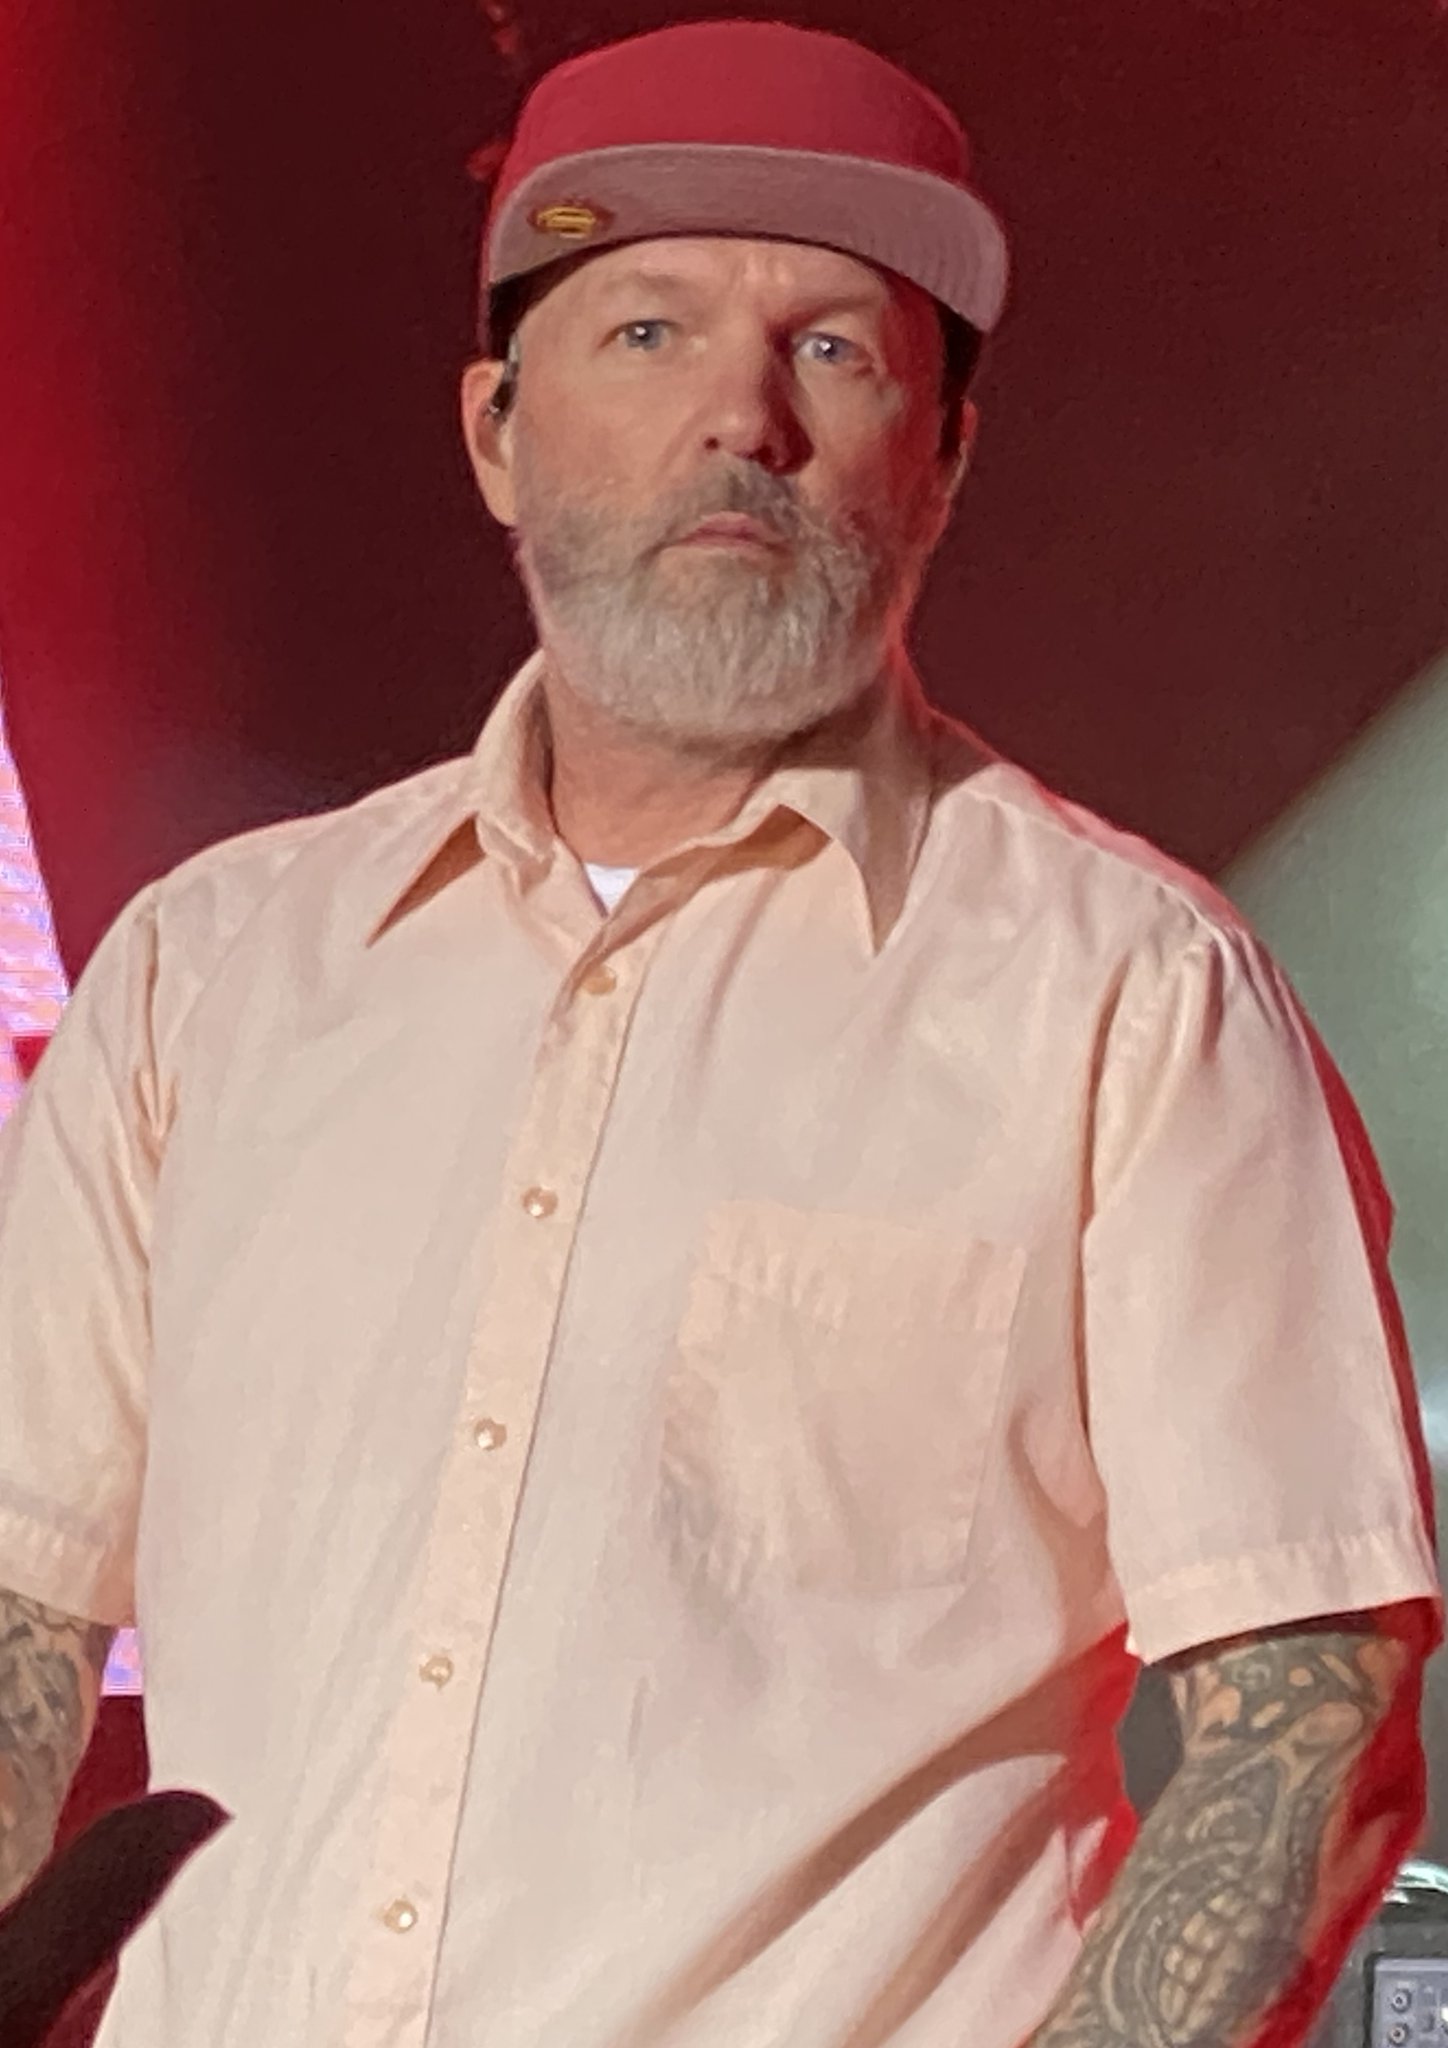 Happy Birthday to Fred Durst of Limp Bizkit 
(August 20, 1970). 